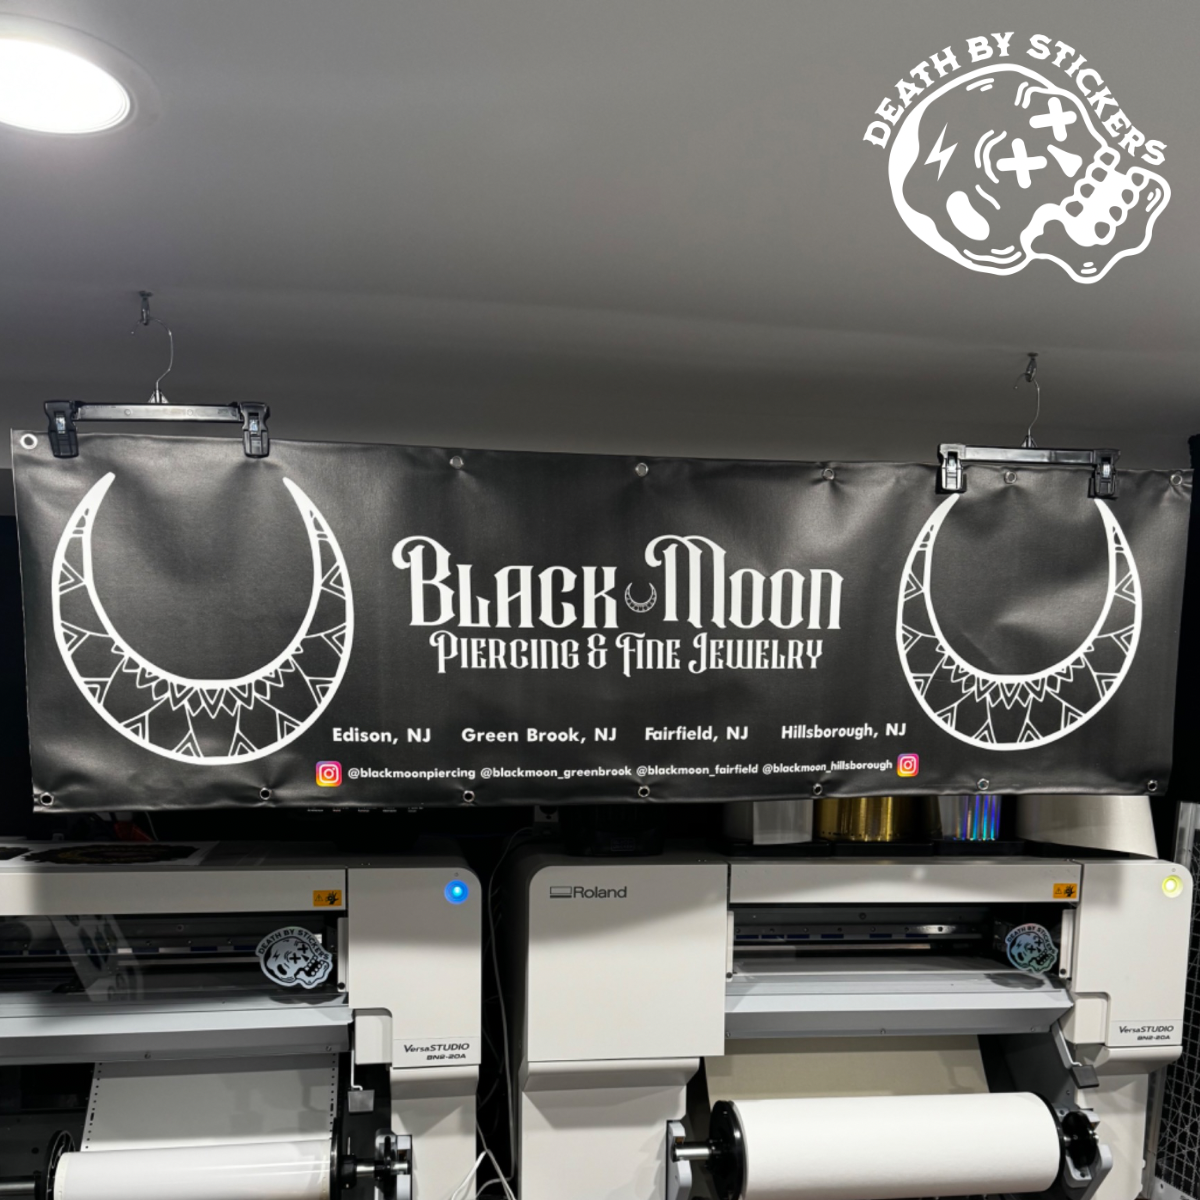 Custom Trade Show and Display Banners from Your Design